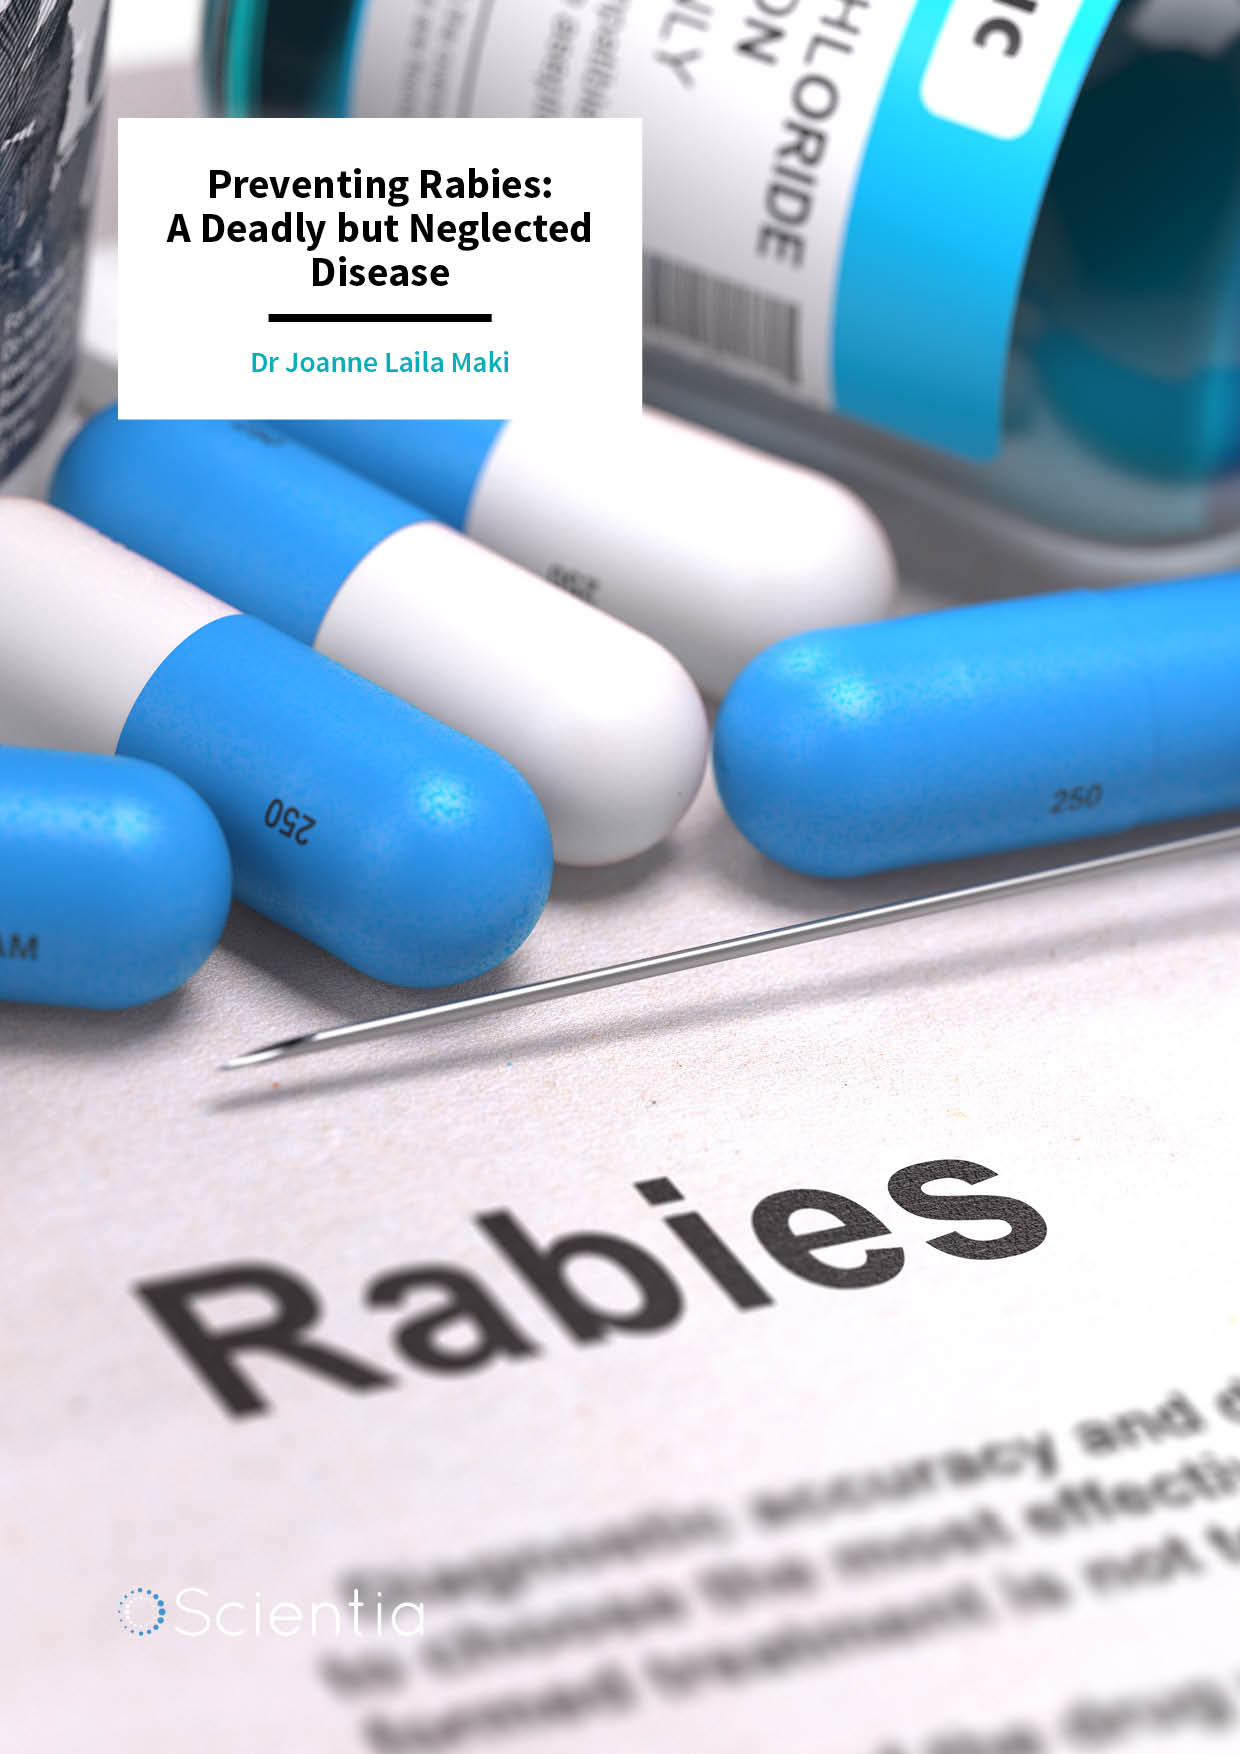 Dr Joanne Maki – Preventing Rabies: A Deadly but Neglected Disease